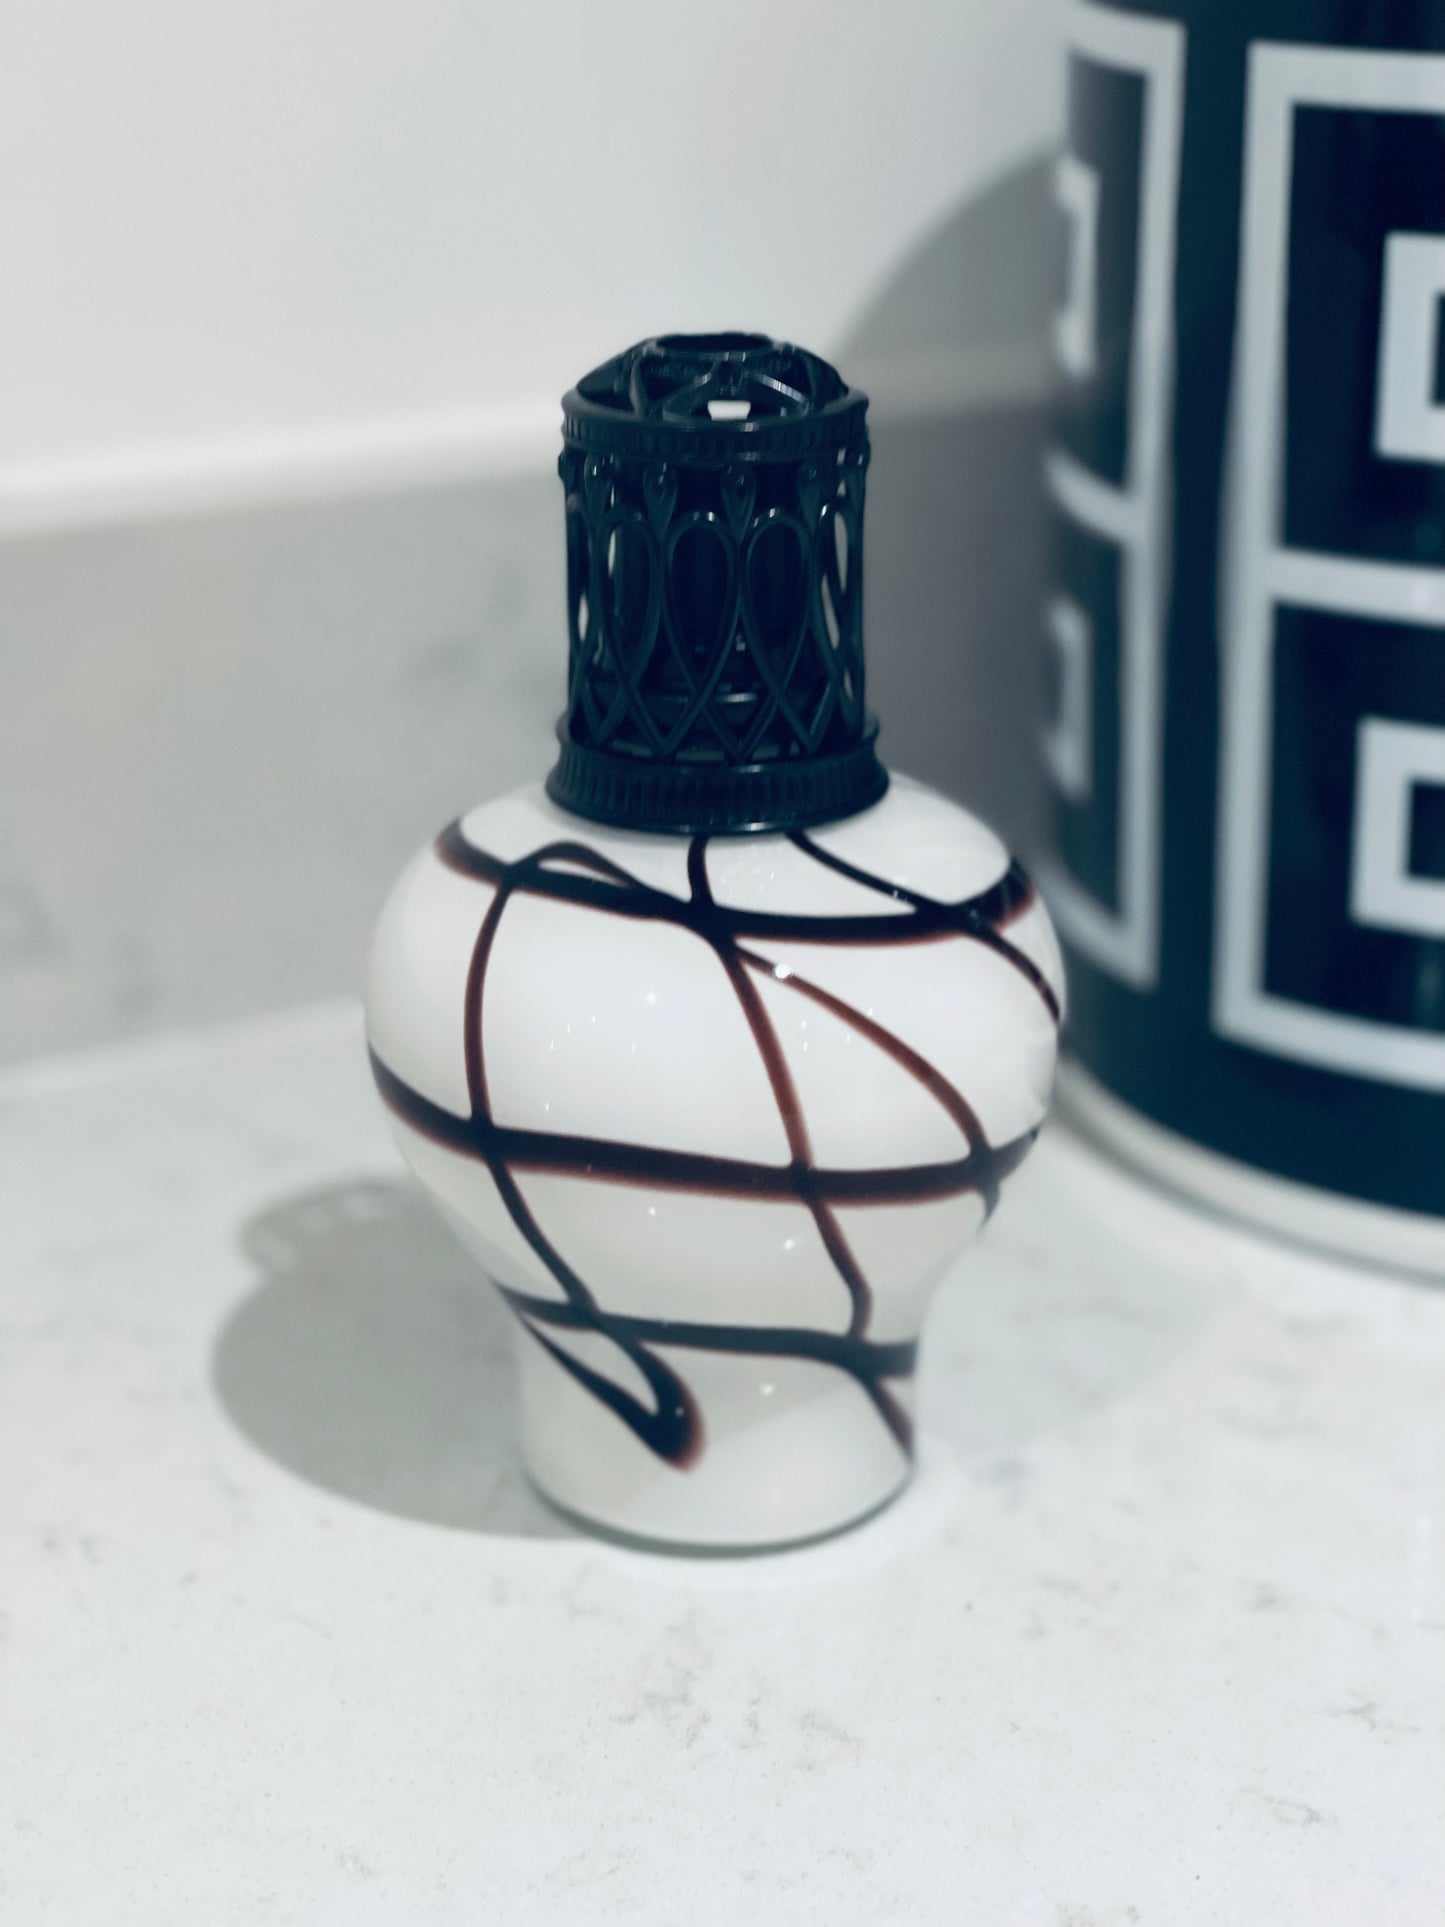 The Odyssey Fragrance Lamp